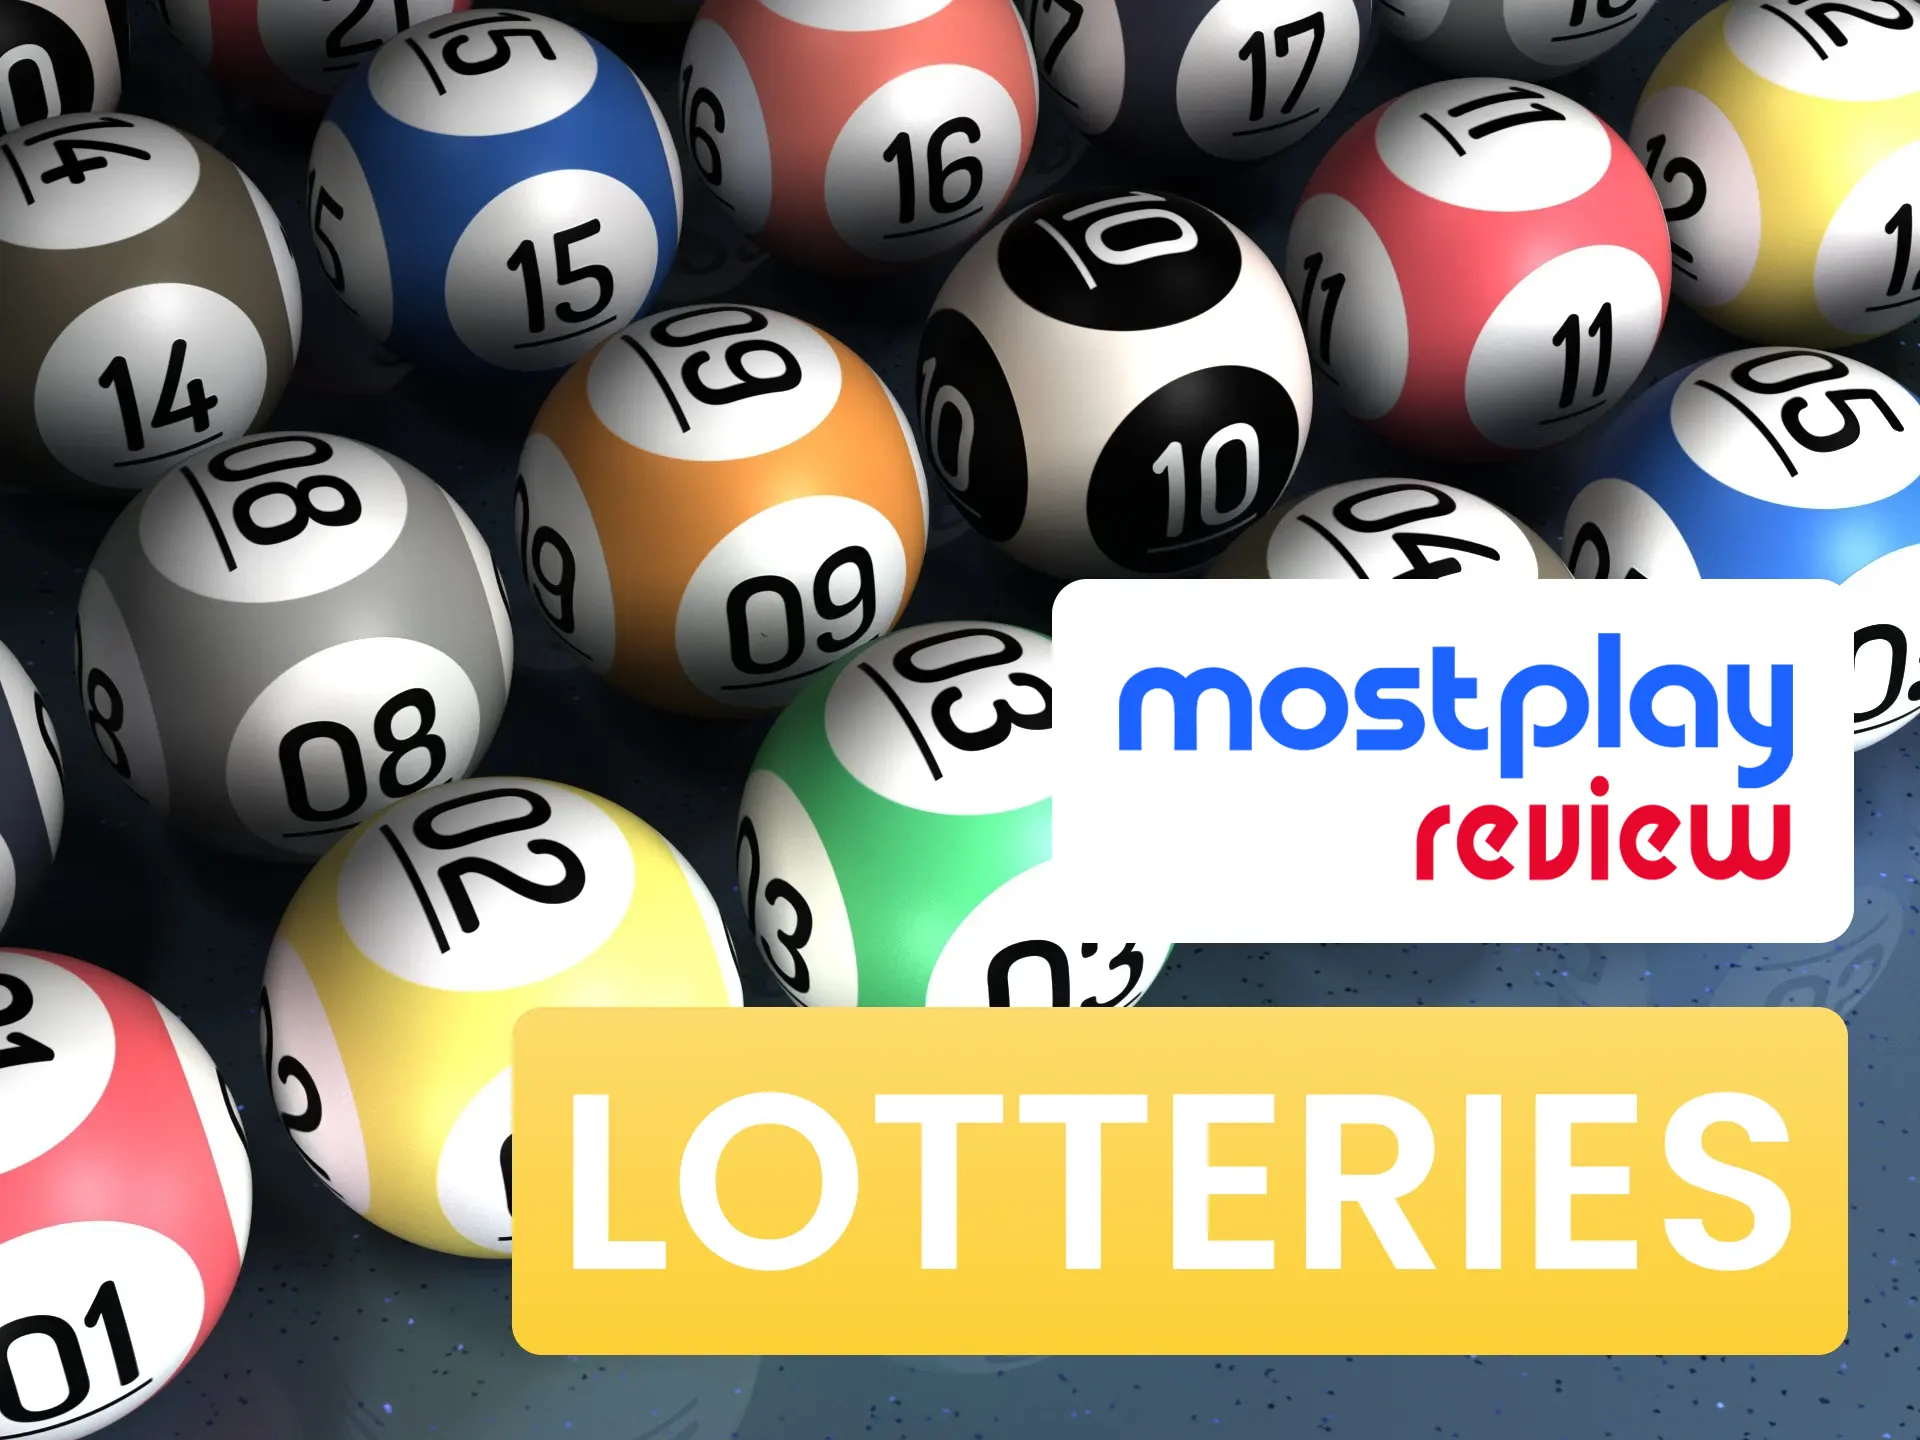 Win a huge amount of money by playing the Mostplay lottery.